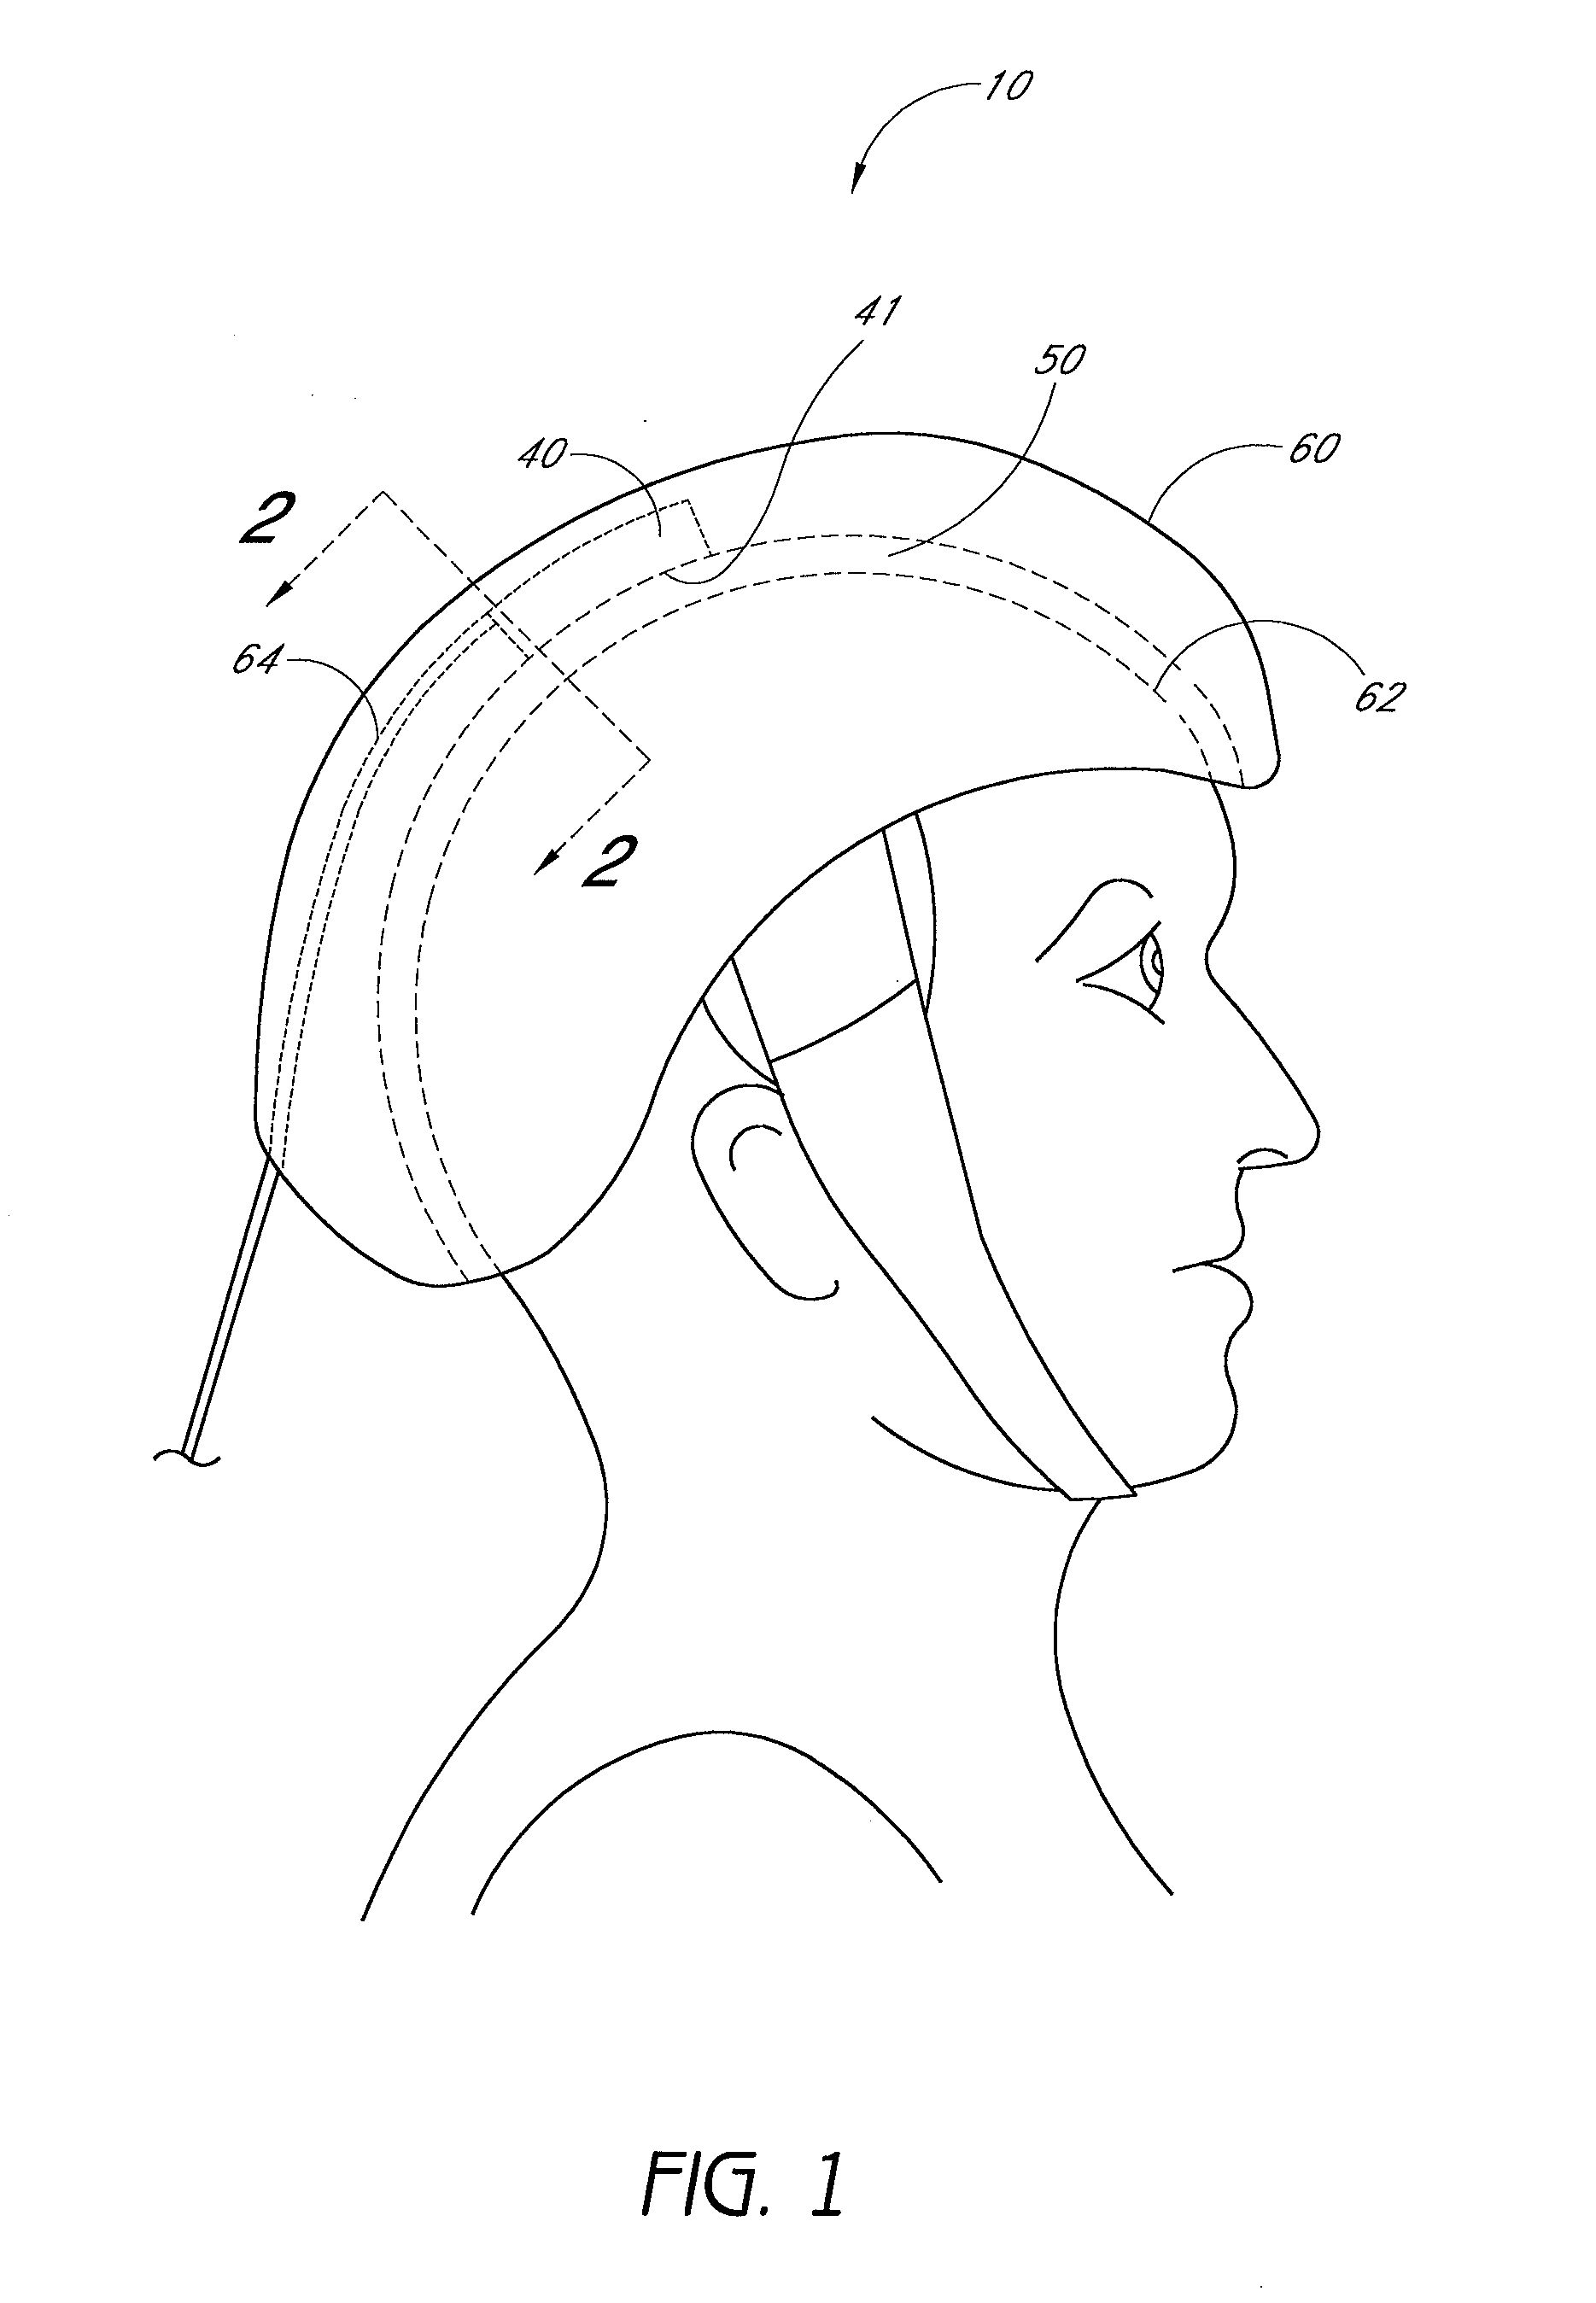 Light-emitting device and method for providing phototherapy to the brain